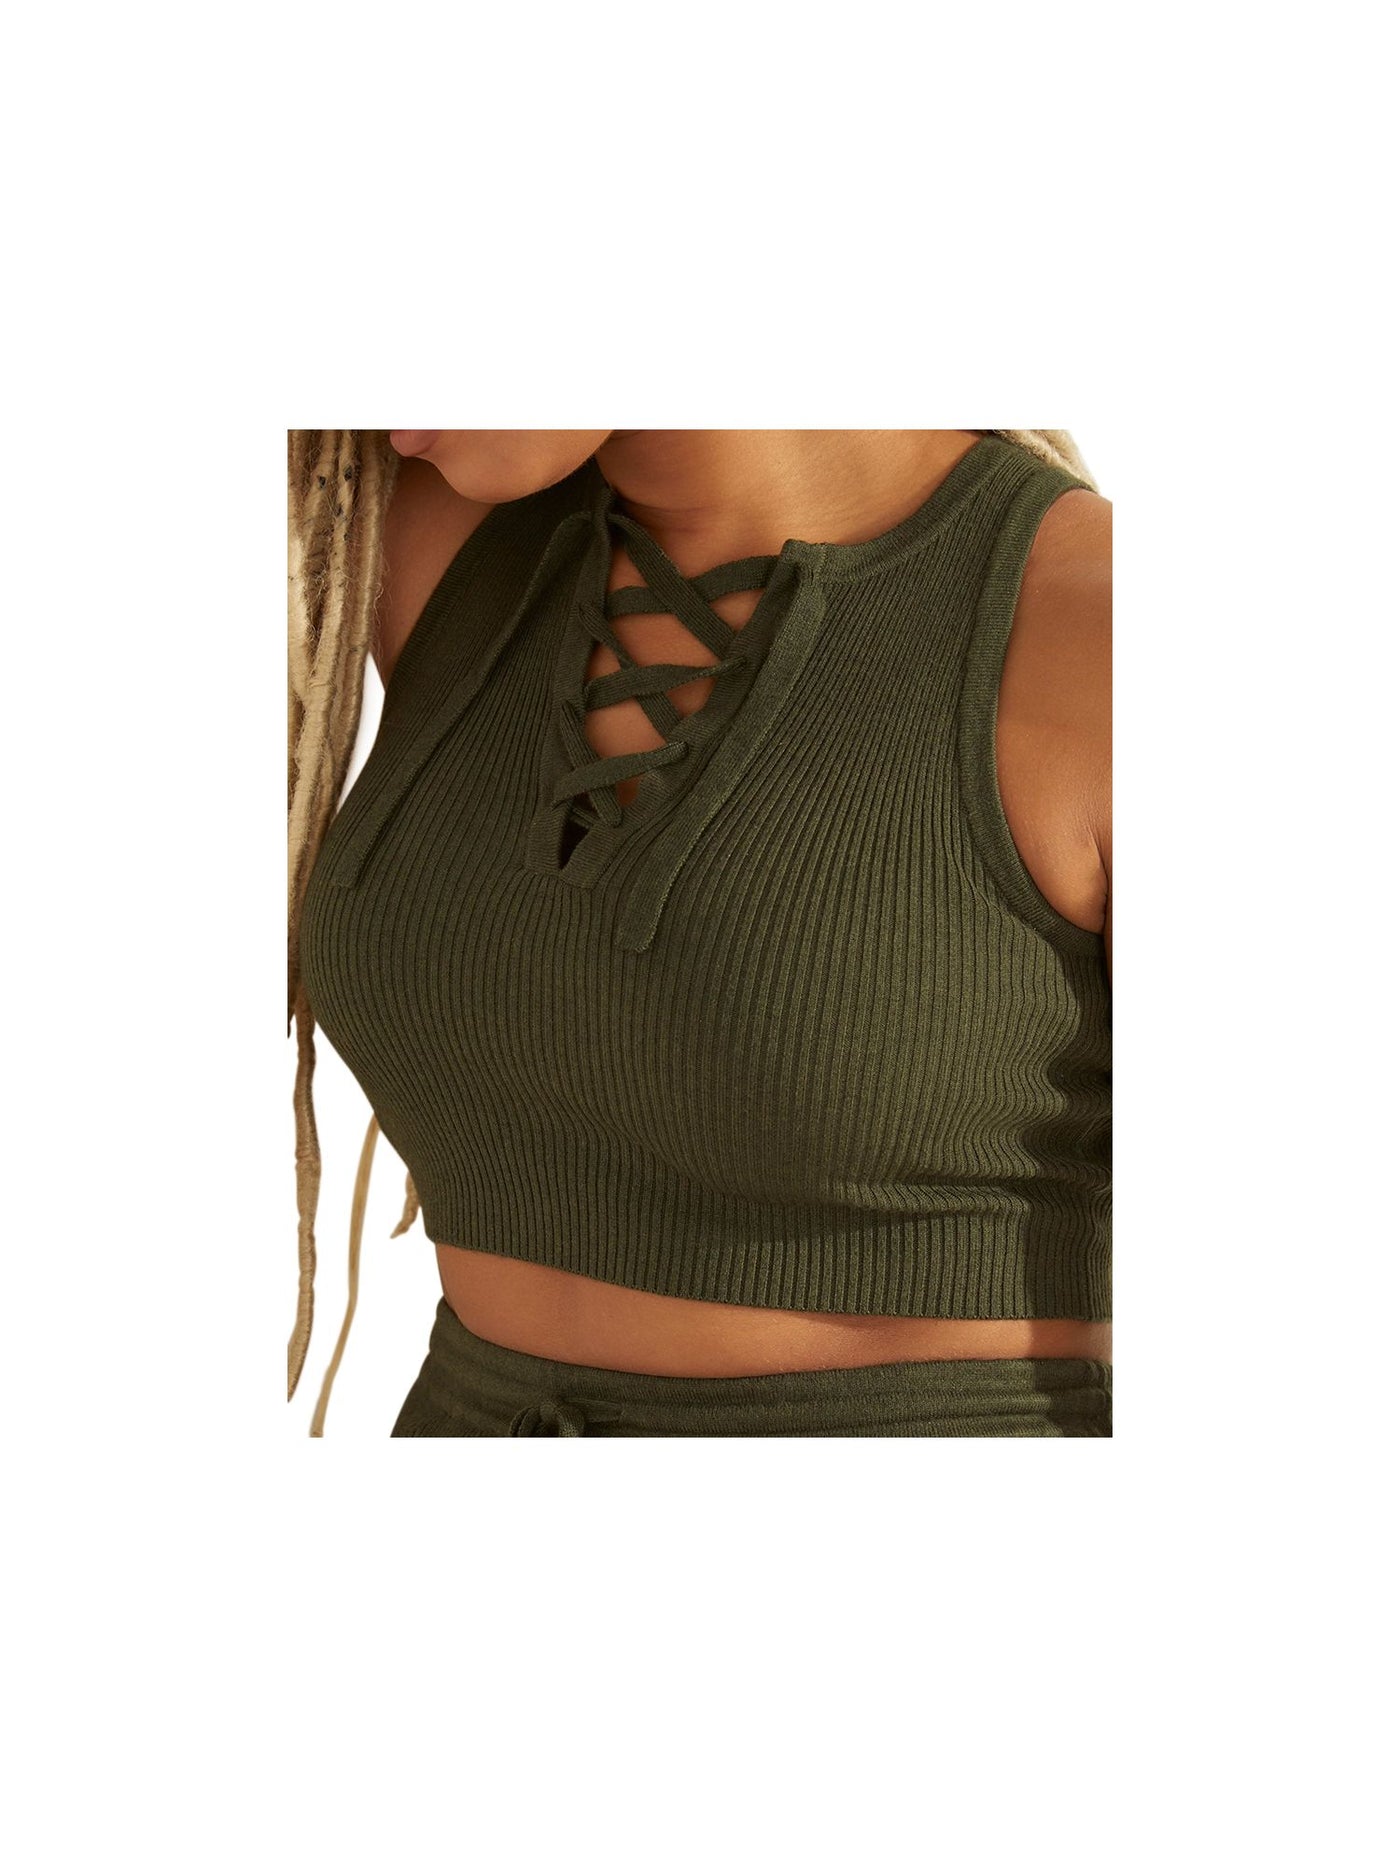 GUESS Womens Green Ribbed Lace-up Detail Front Sleeveless Jewel Neck Crop Top Sweater M